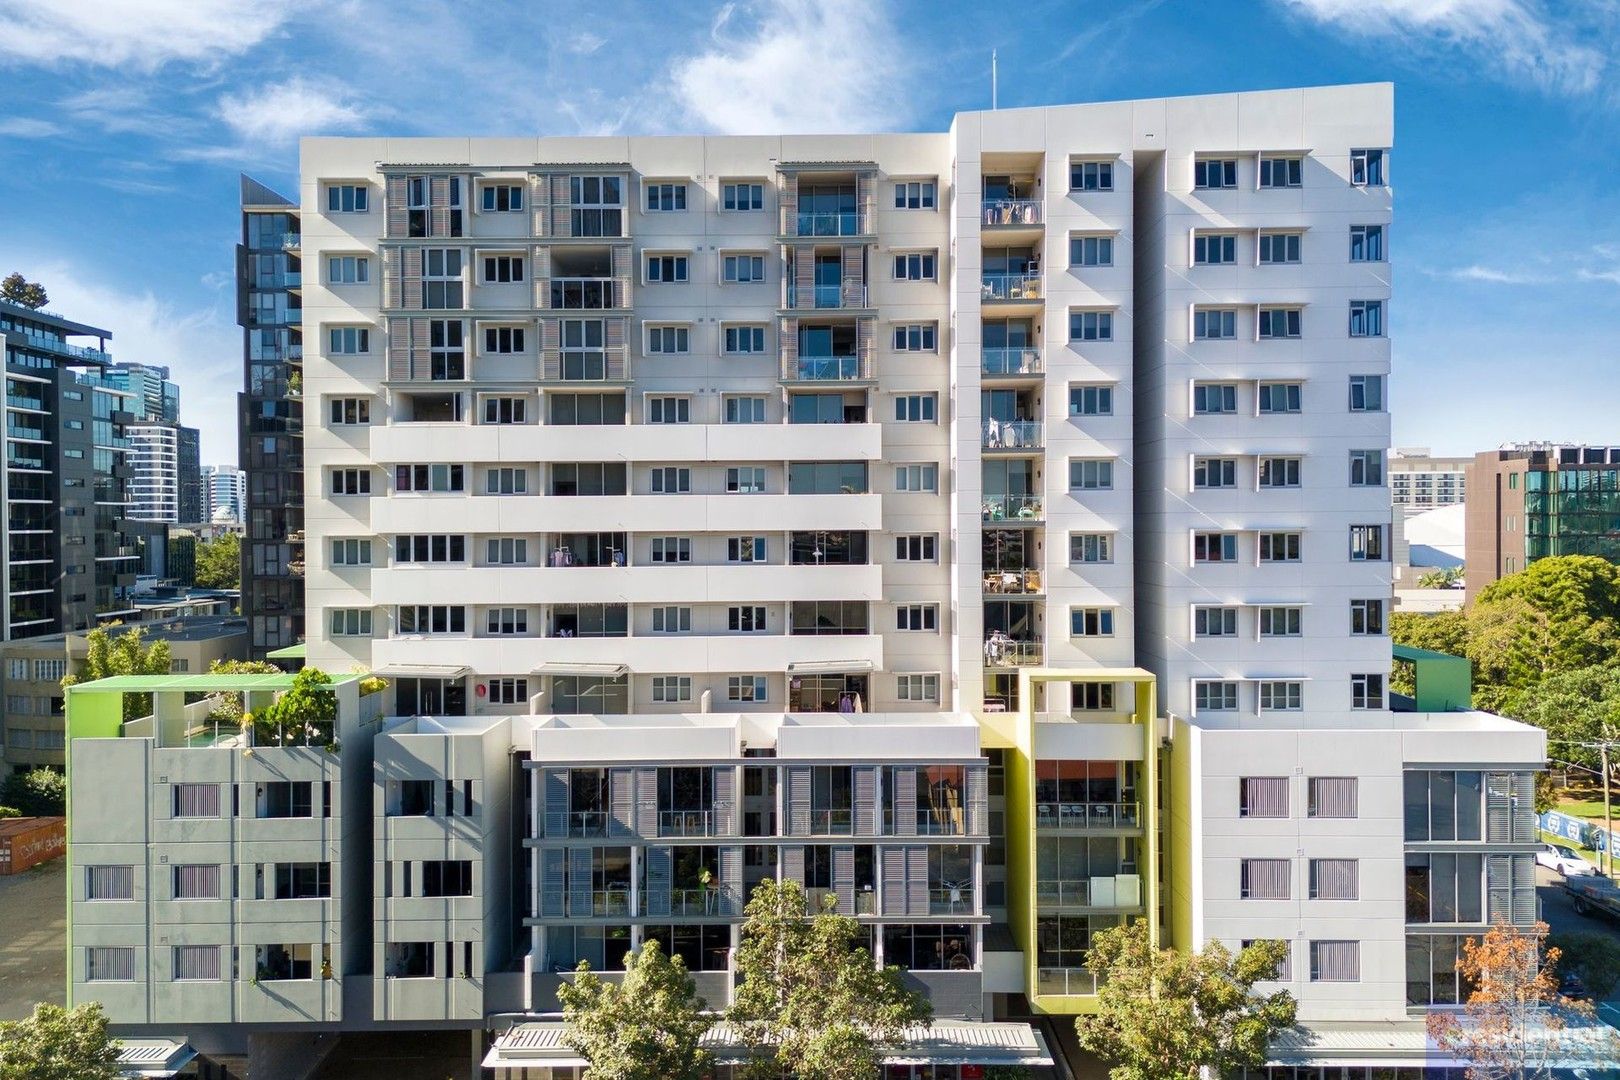 2 bedrooms Block of Units in 316/66 Manning Street SOUTH BRISBANE QLD, 4101